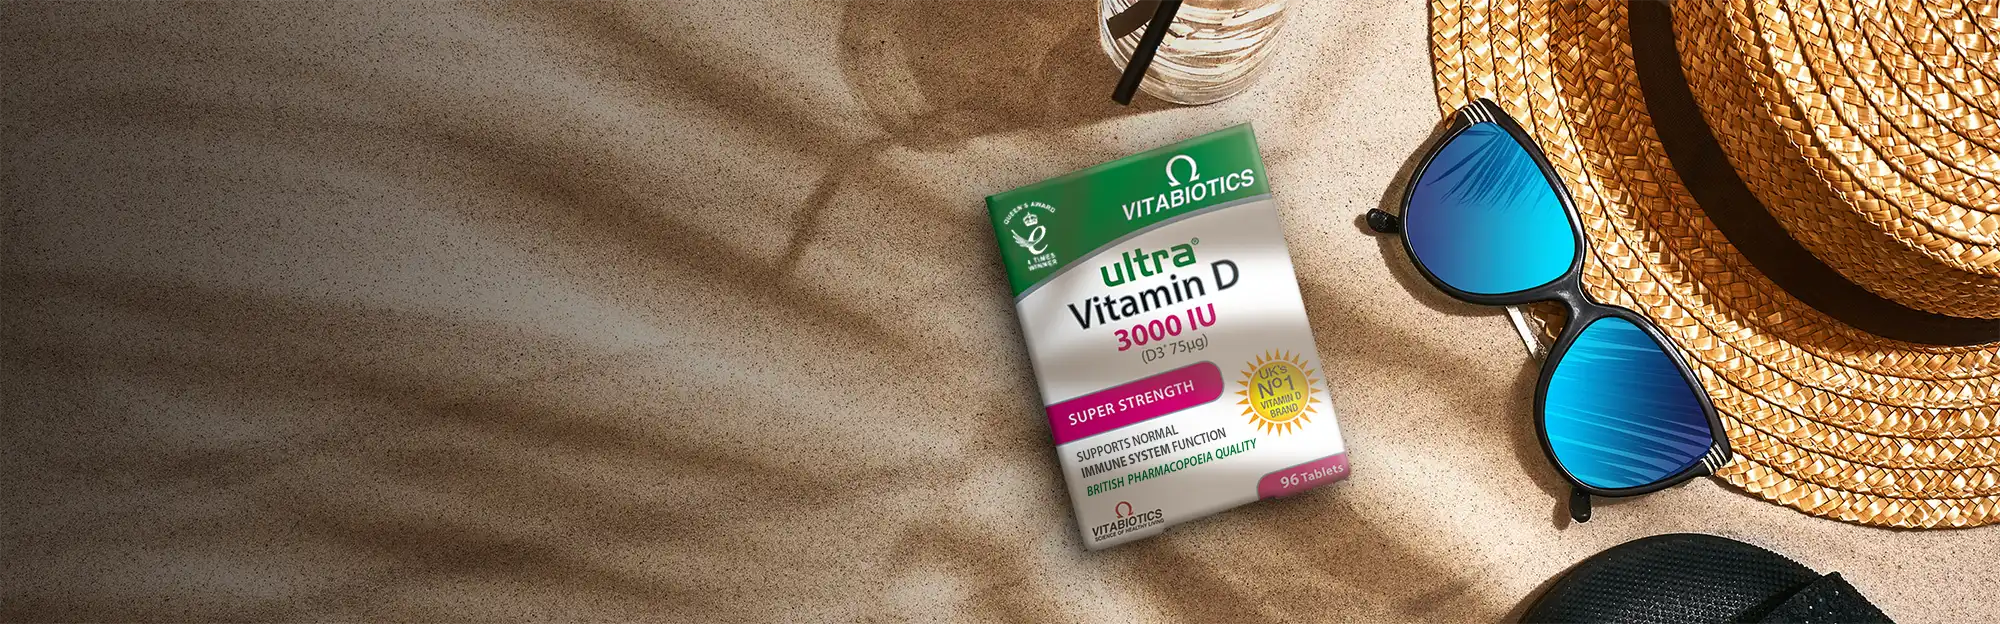  Vitamin D is now more important than ever, especially for all round health and wellness. It is recommended to safeguard your vitamin D intake through daily supplementation. Ultra Vitamin D 3000 IU Super Strength has been developed by Vitabiotics experts. 